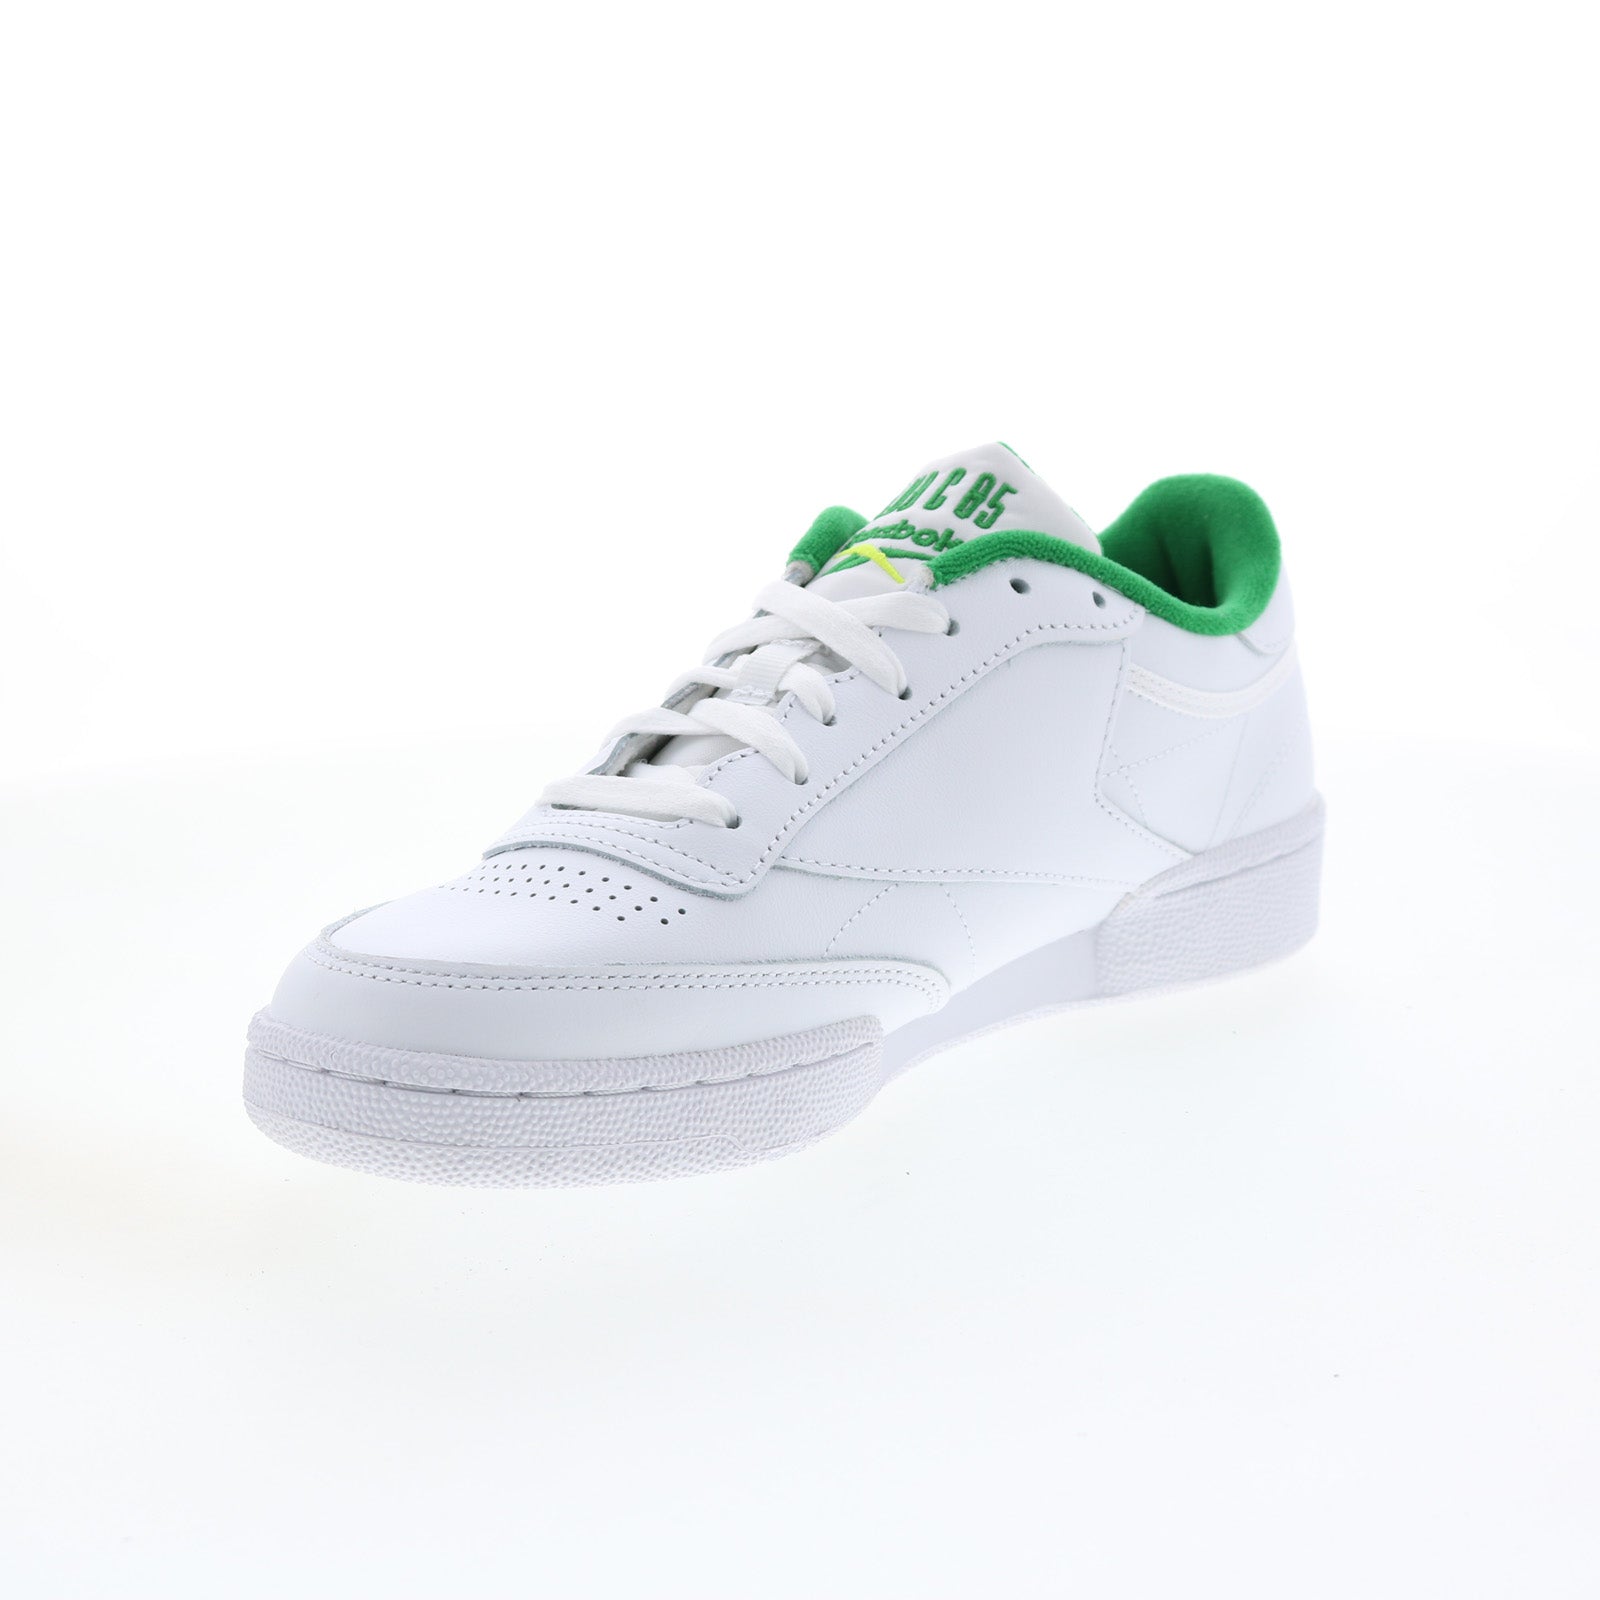 Reebok Club C 85 IE9387 Mens White Leather Lace Up Lifestyle Sneakers ...